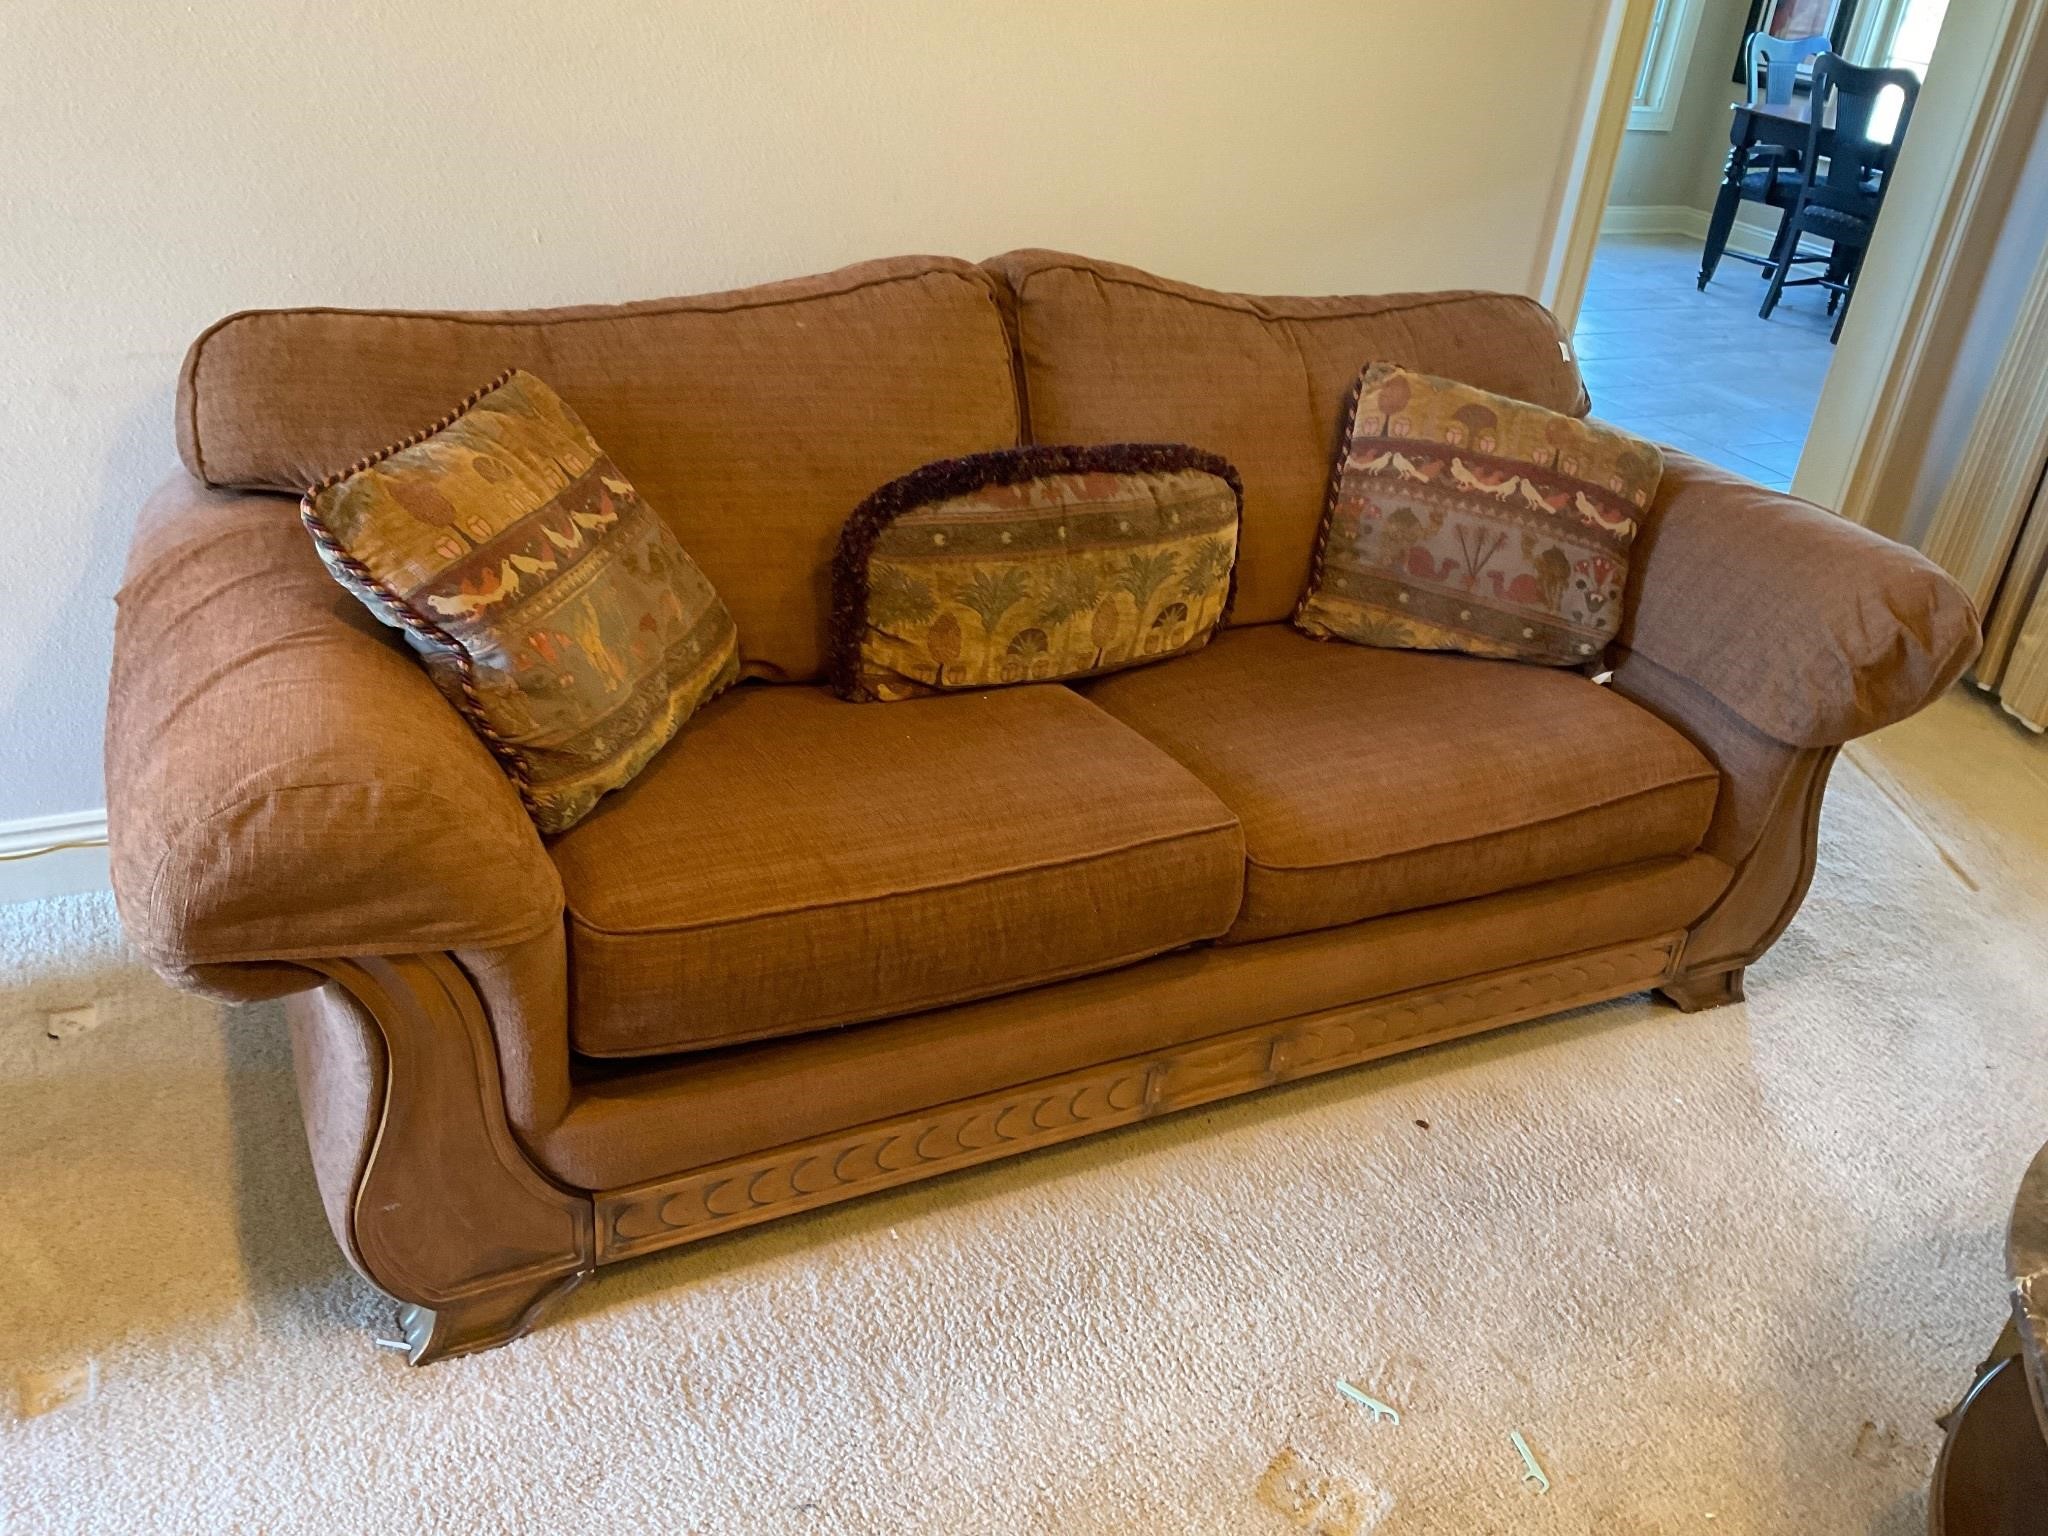 Flexsteel 7 ft couch with oak accents